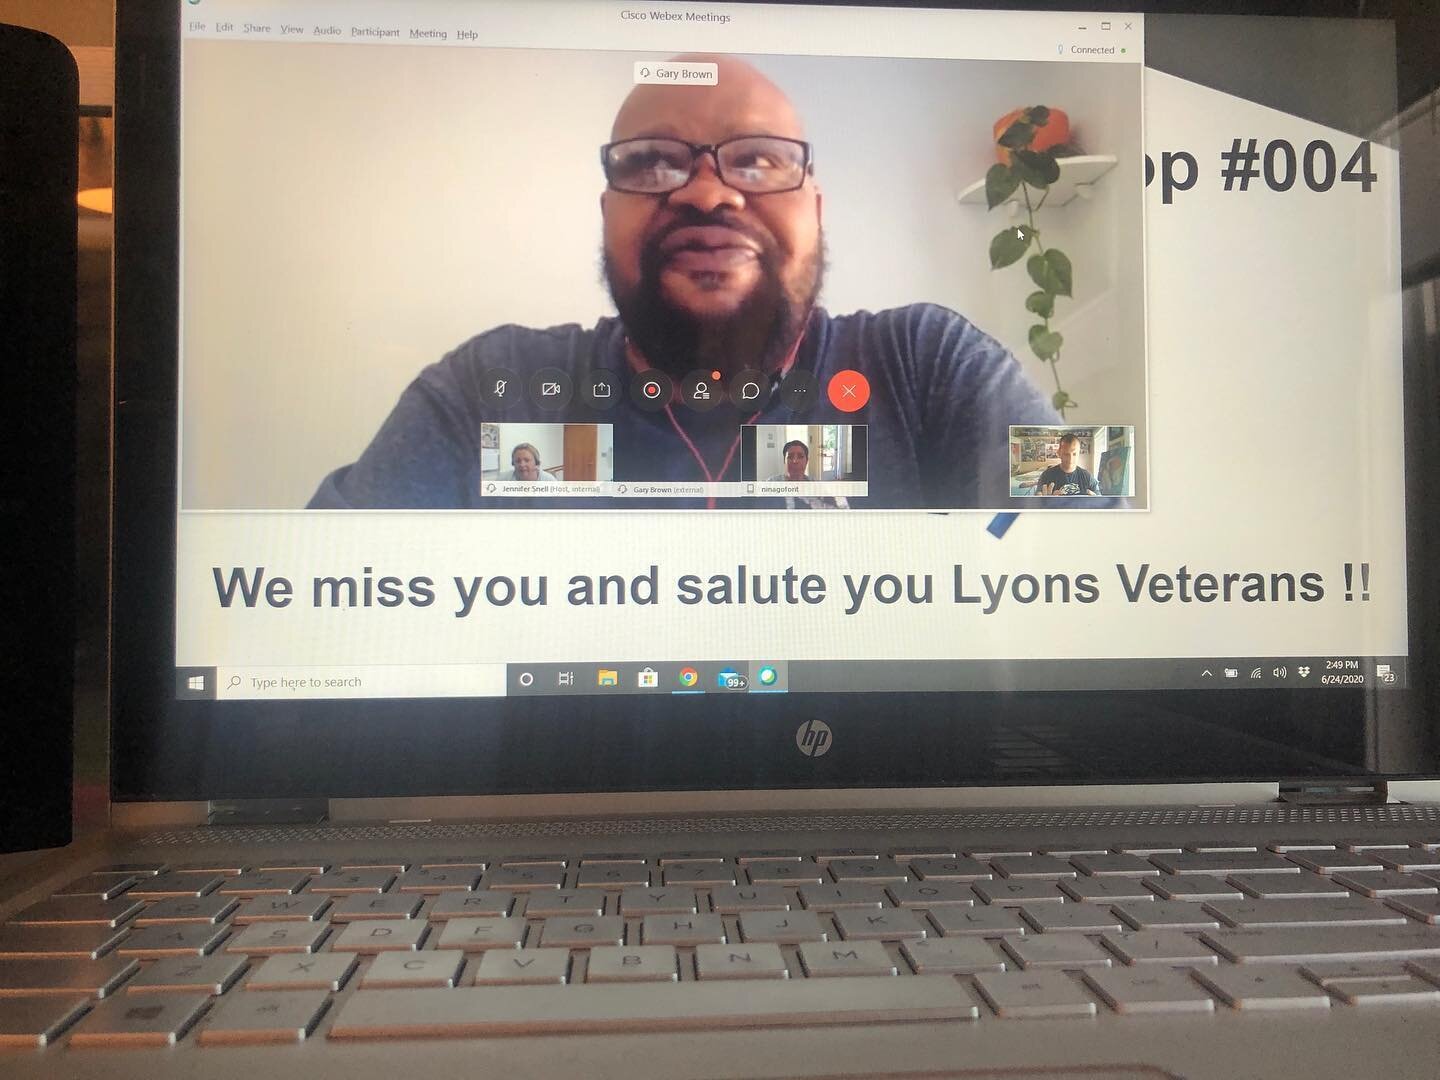 We hosted  Virtual Wellness Workshop #4 for our NJ VA at Lyons. We made ourselves available for anyone there who needed to connect. I want to thank our team for checking in and seeing some smiles! Thank you everyone who made today so special.  We wil